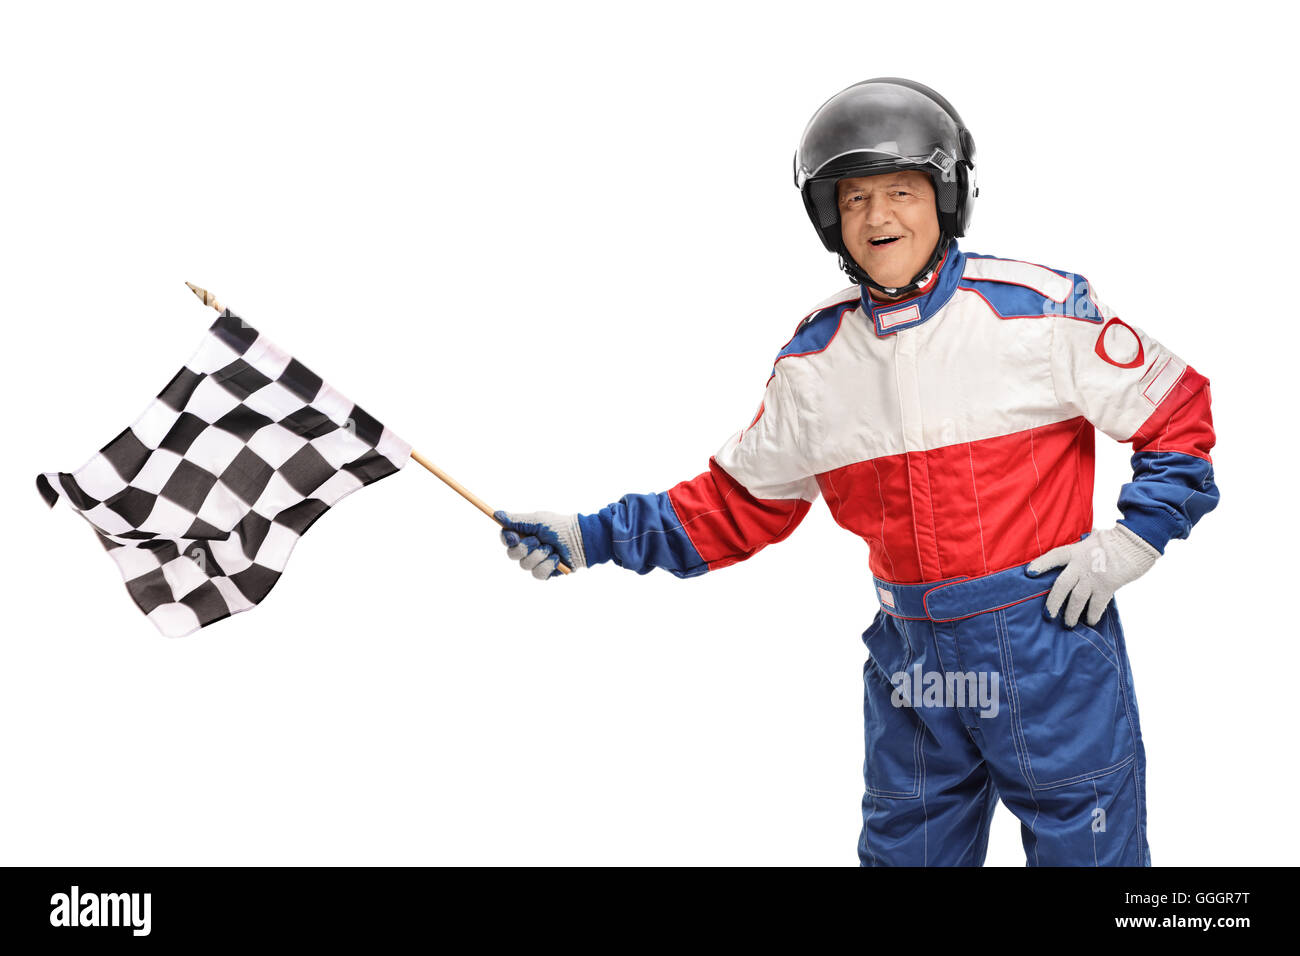 Mature race driver waving a checkered flag isolated on white background Stock Photo